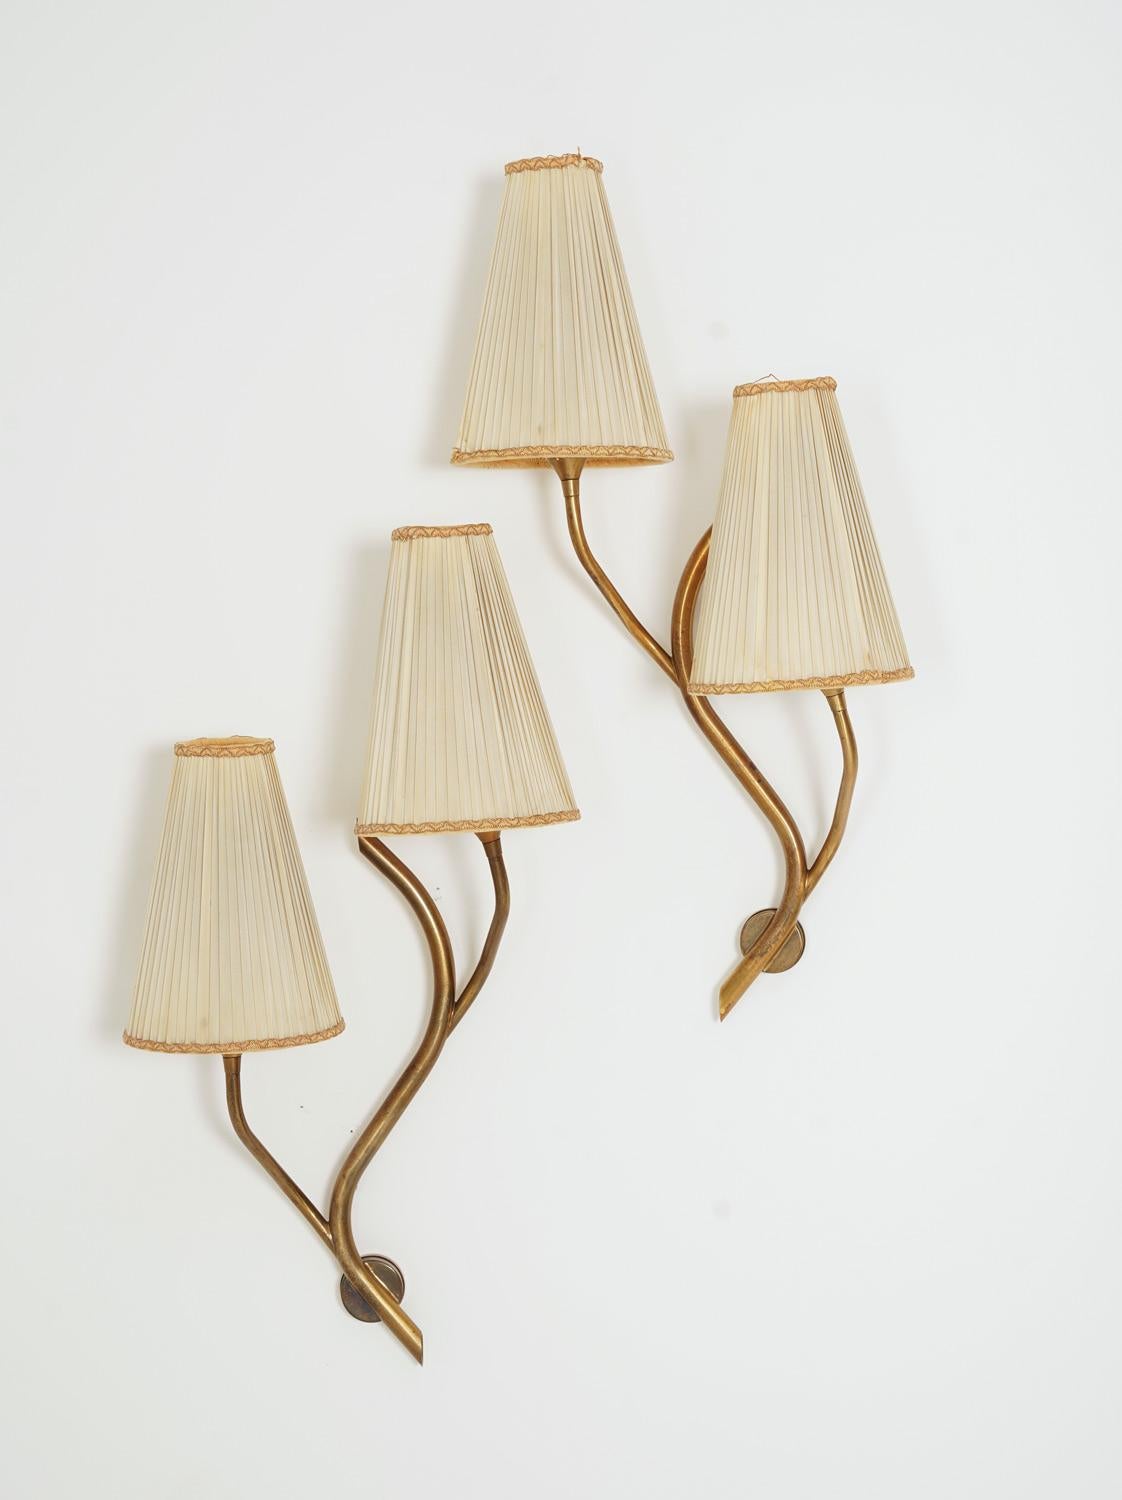 Pair of wall lamps produced by Astra, Norway, 1950s.
Stunning organically-shaped wall lamps, creating a perfect pair. The lamps come with vintage off-white fabric shades.

Condition: Good original condition with patina. The shades have som stains